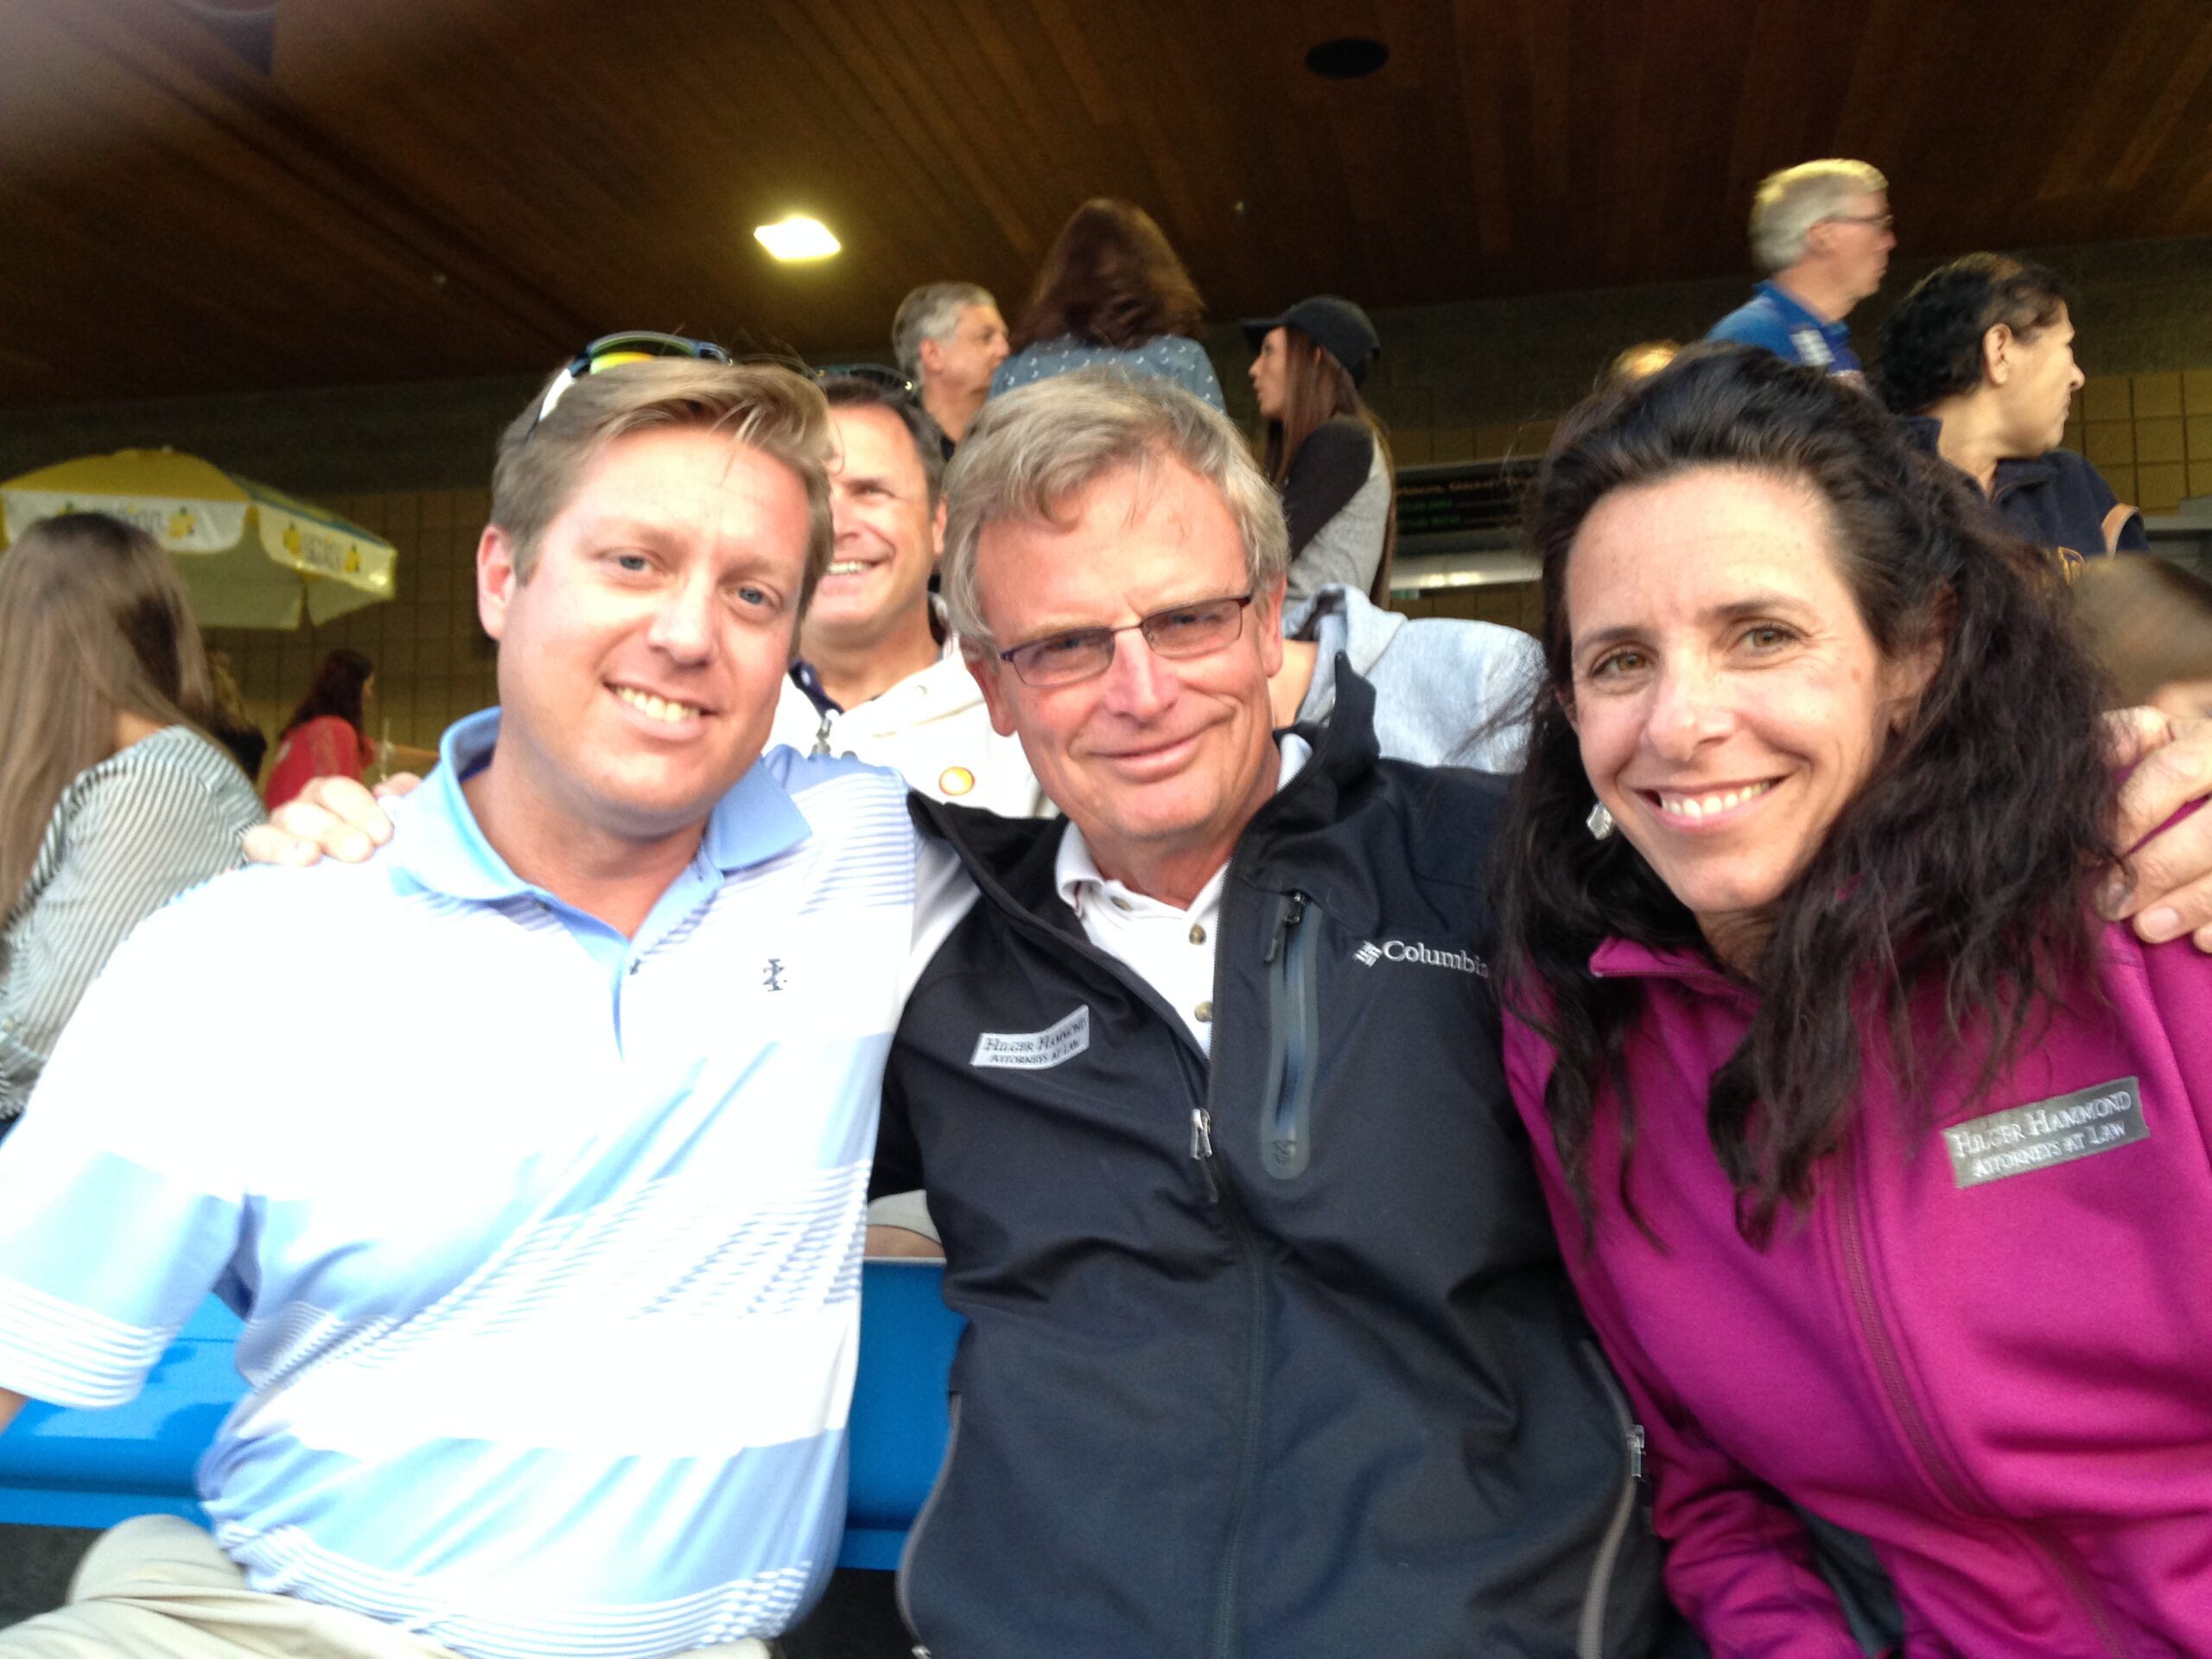 Attorneys Aileen Leipprandt, Steve Hilger, and Ben Ben Hammond at a client outing